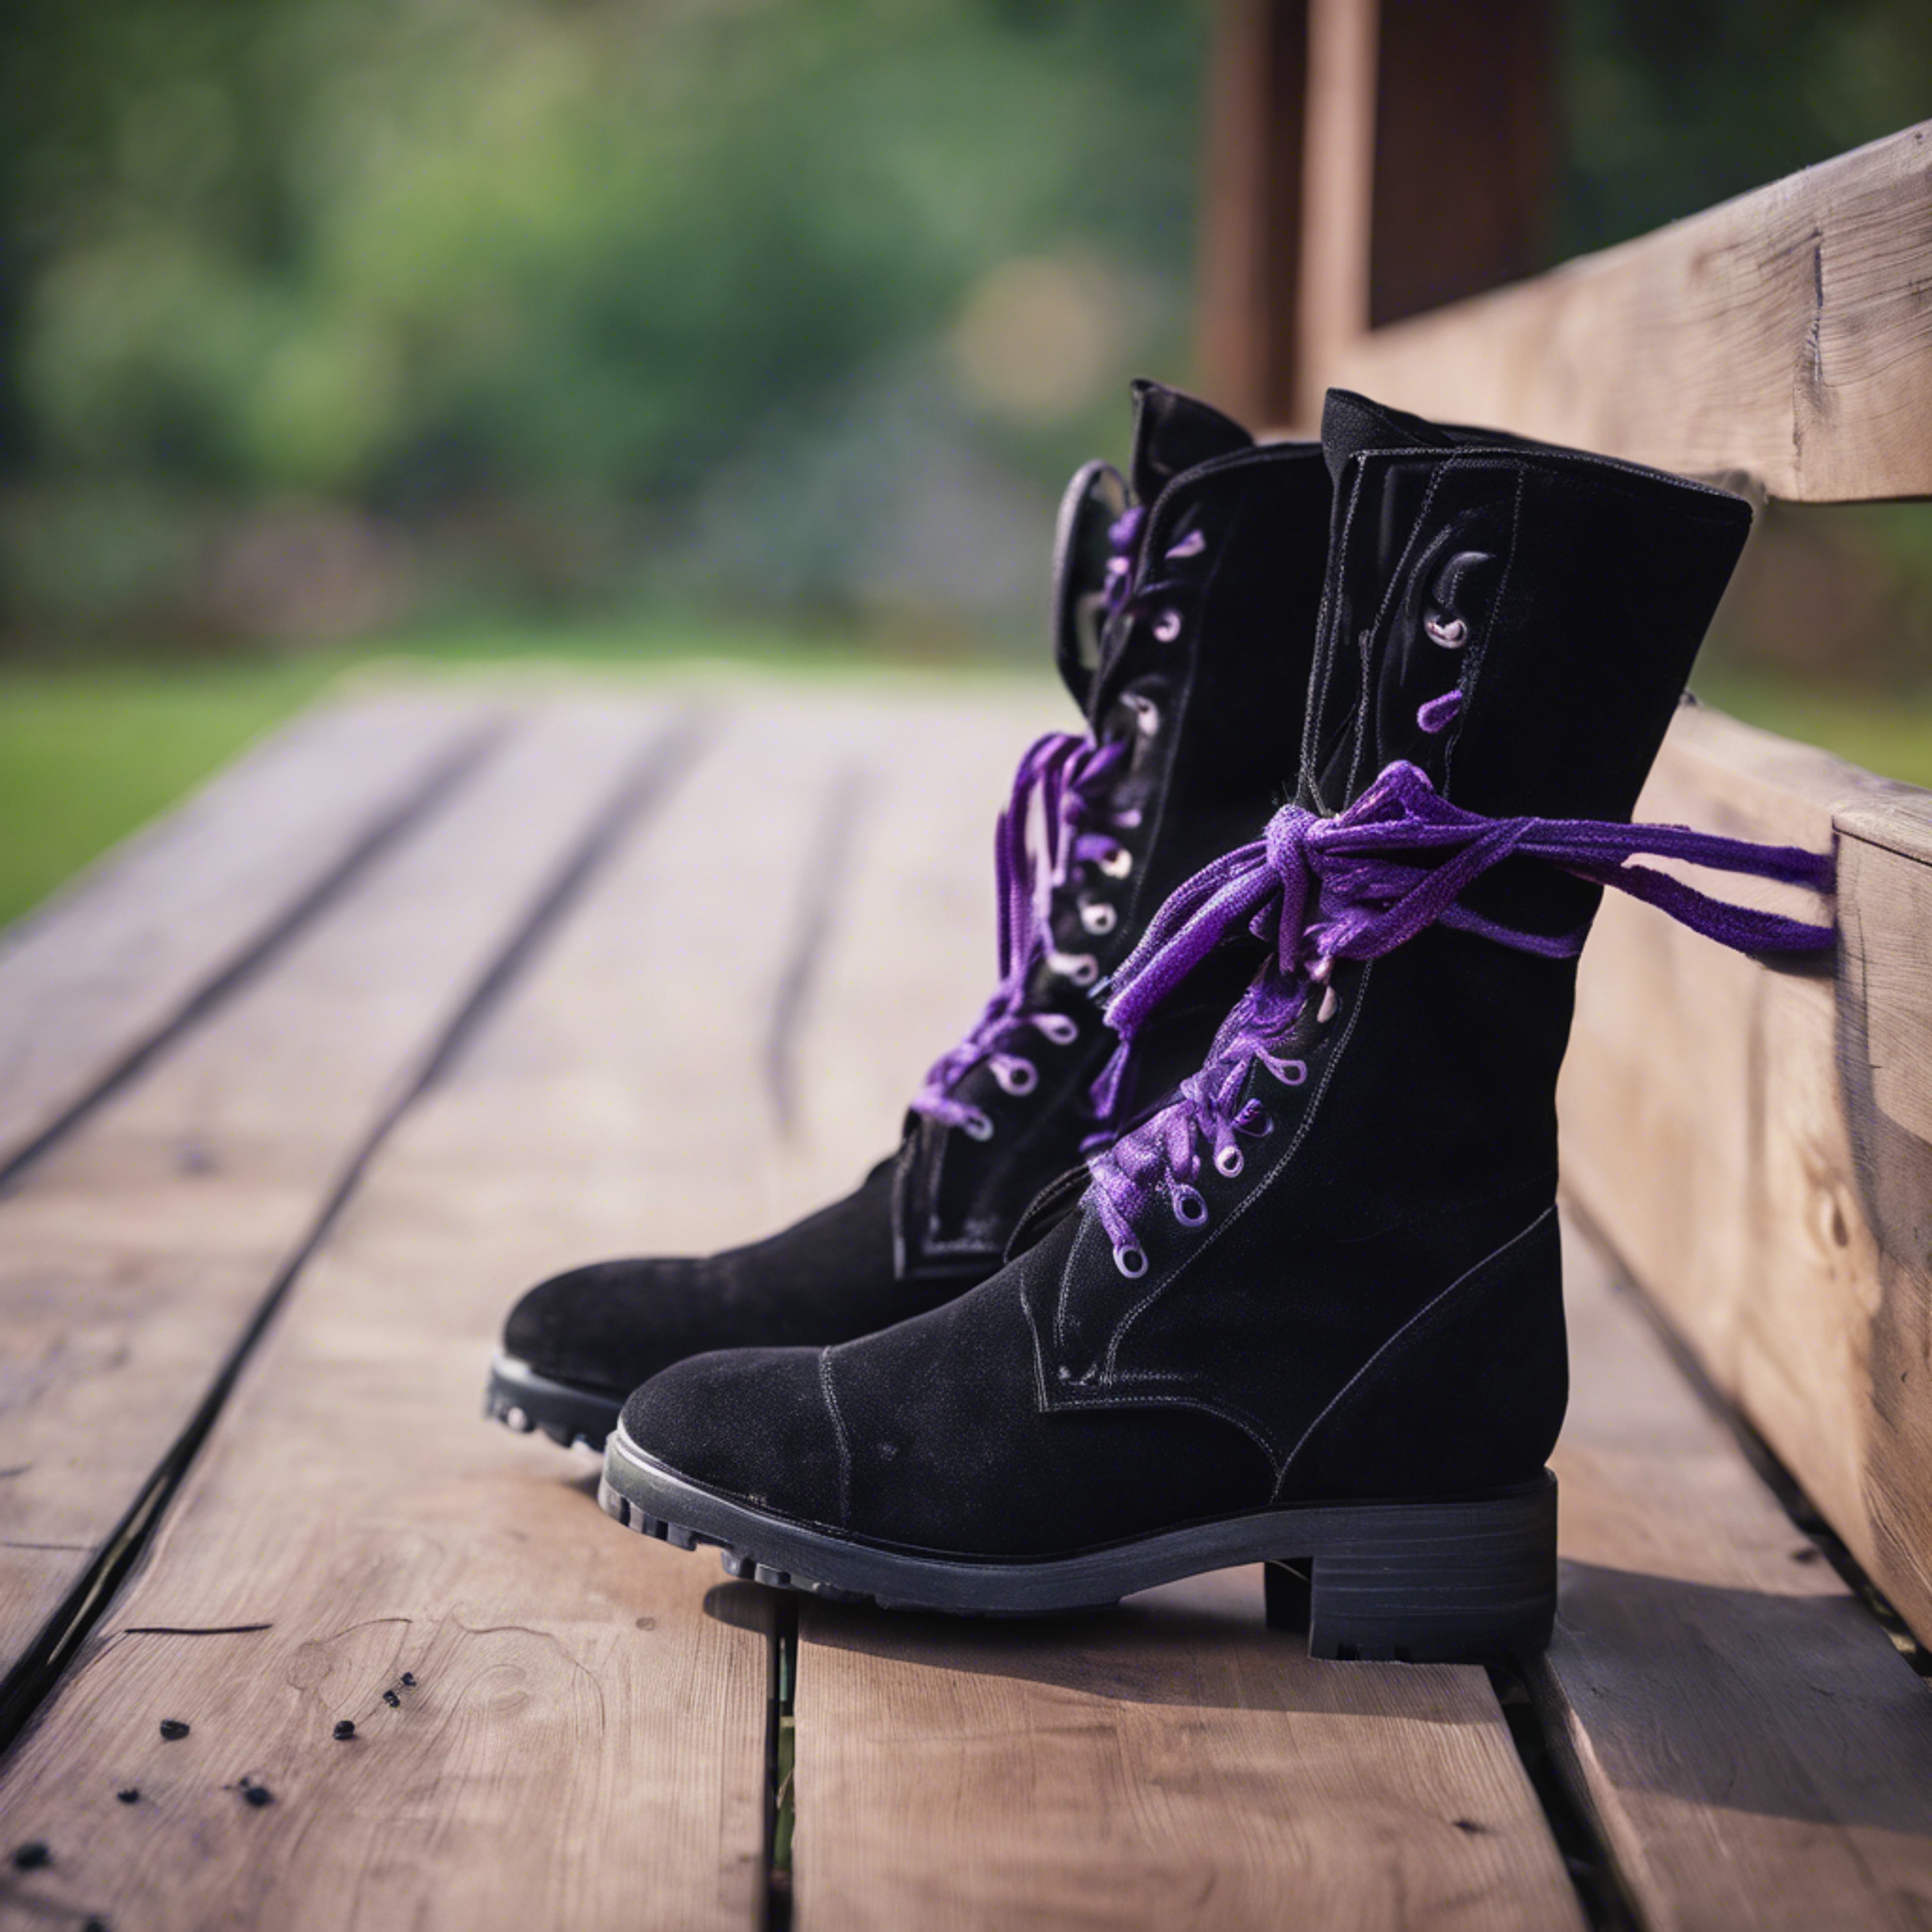 A pair of black suede boots with purple laces left casually on a wooden porch. Wallpaper[fedd81ee4b6b40088ba0]